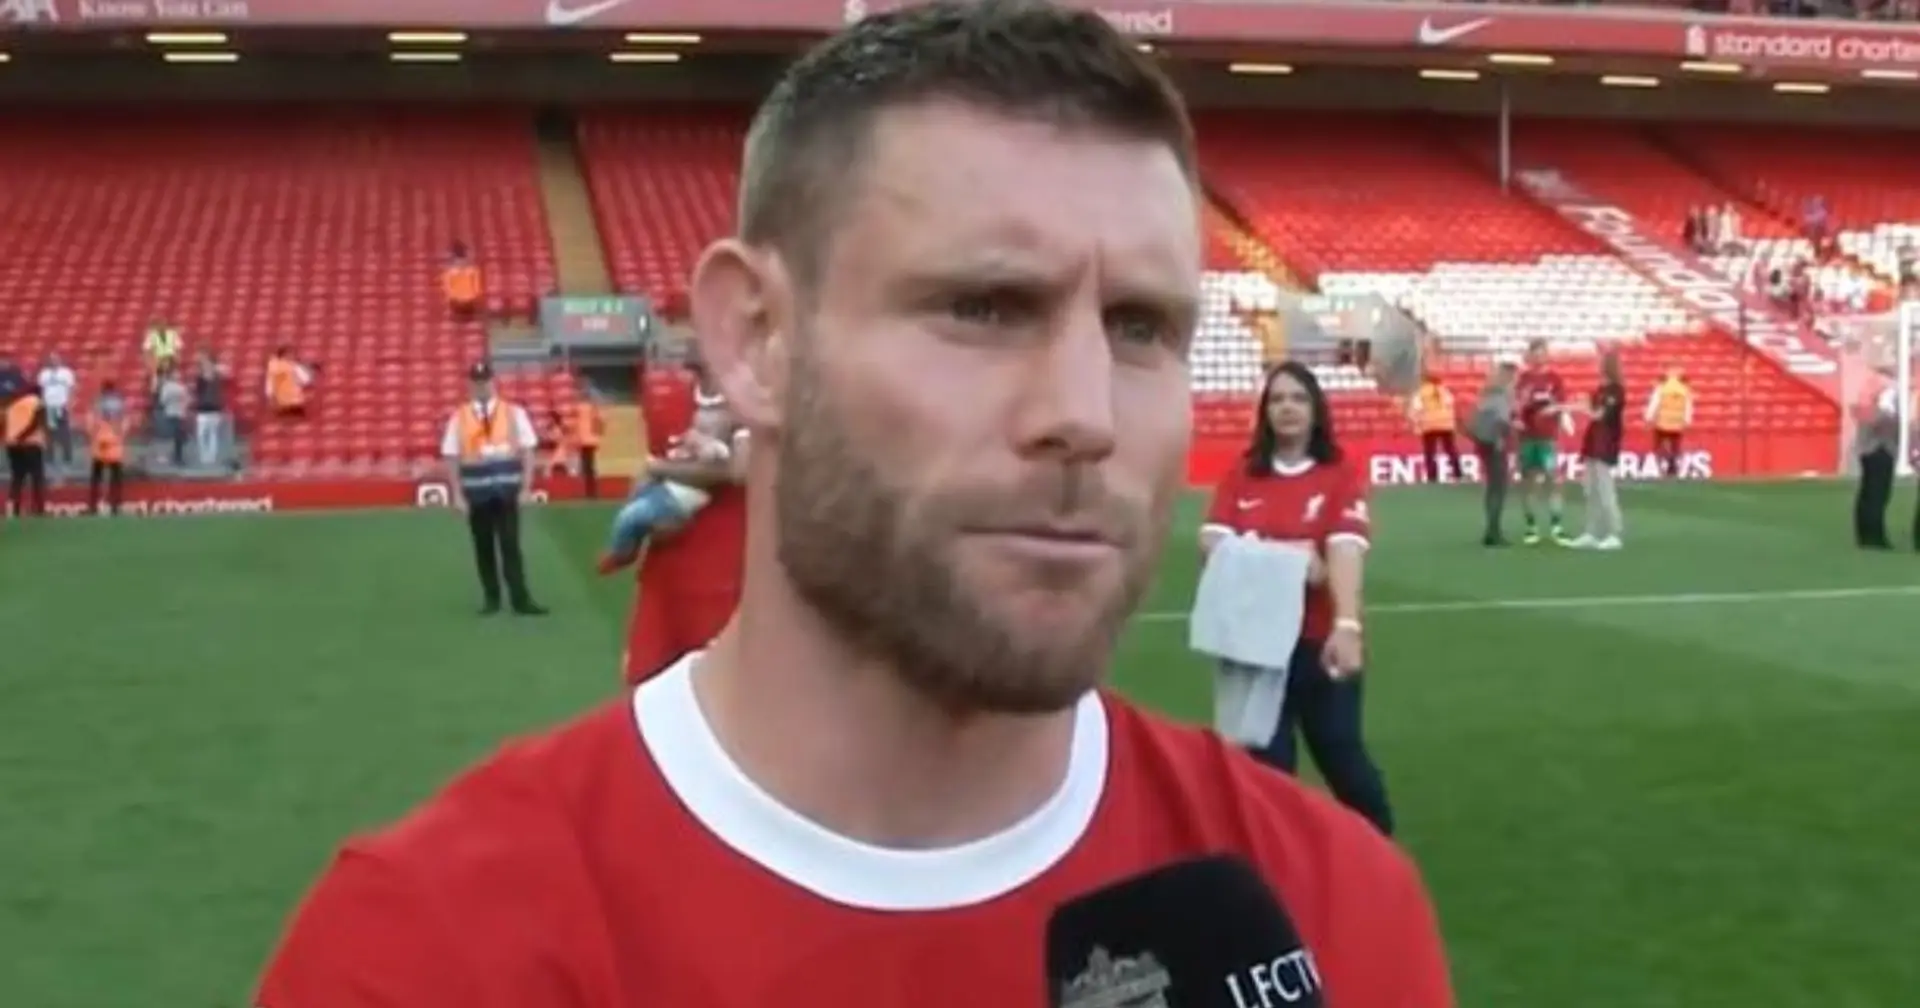 'Once a red, always a red': James Milner sends farewell message to Liverpool fans